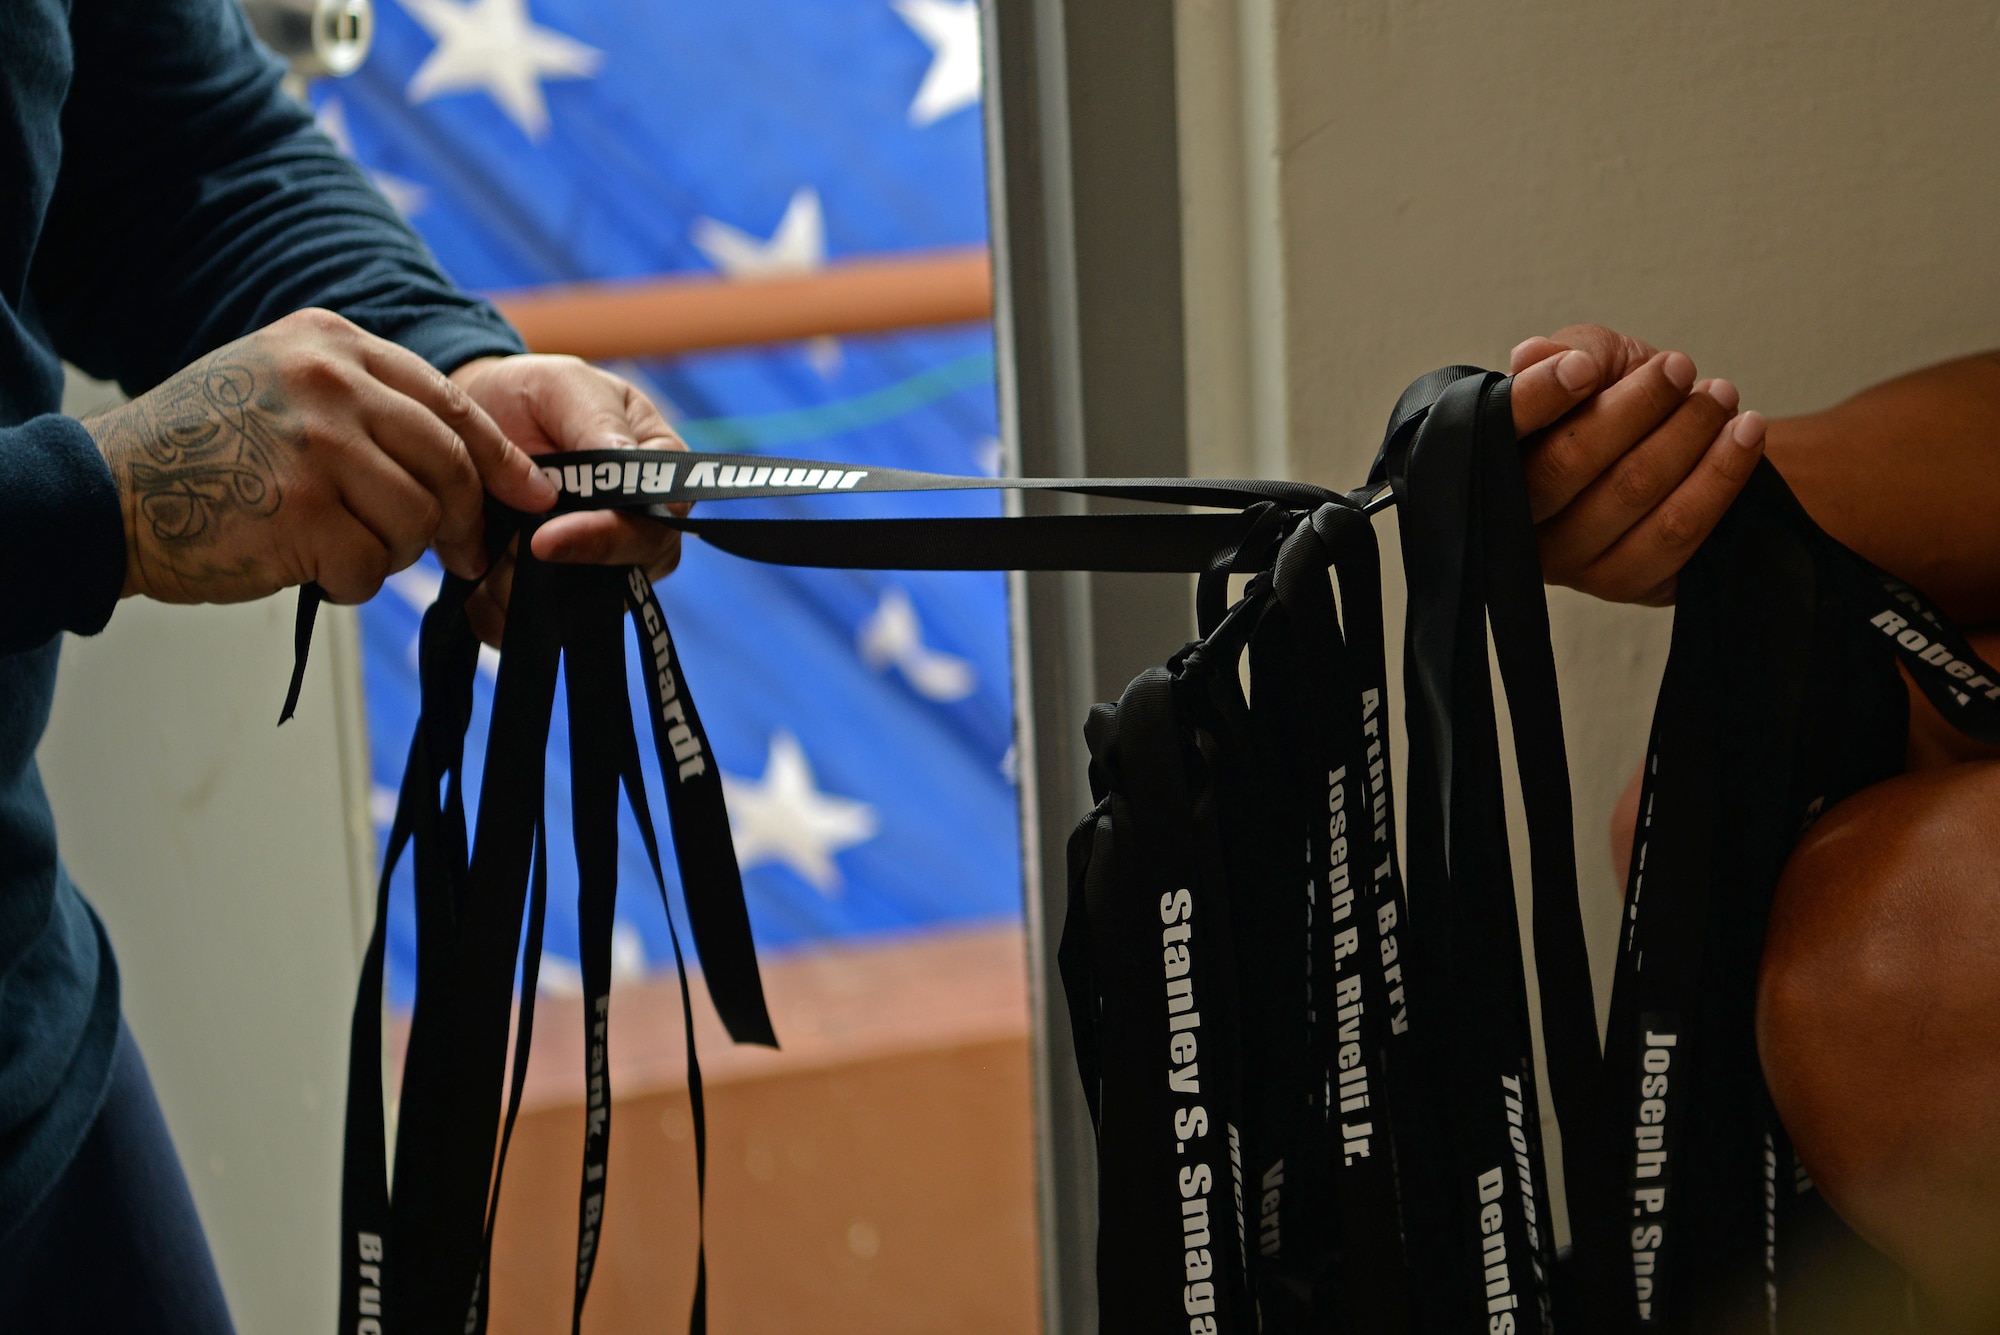 Ribbons labeled with one of the fallen fire fighters is clipped onto a ring during a September 11 memorial stair climb event on Andersen Air Force Base, Guam, Sept. 11, 2019.